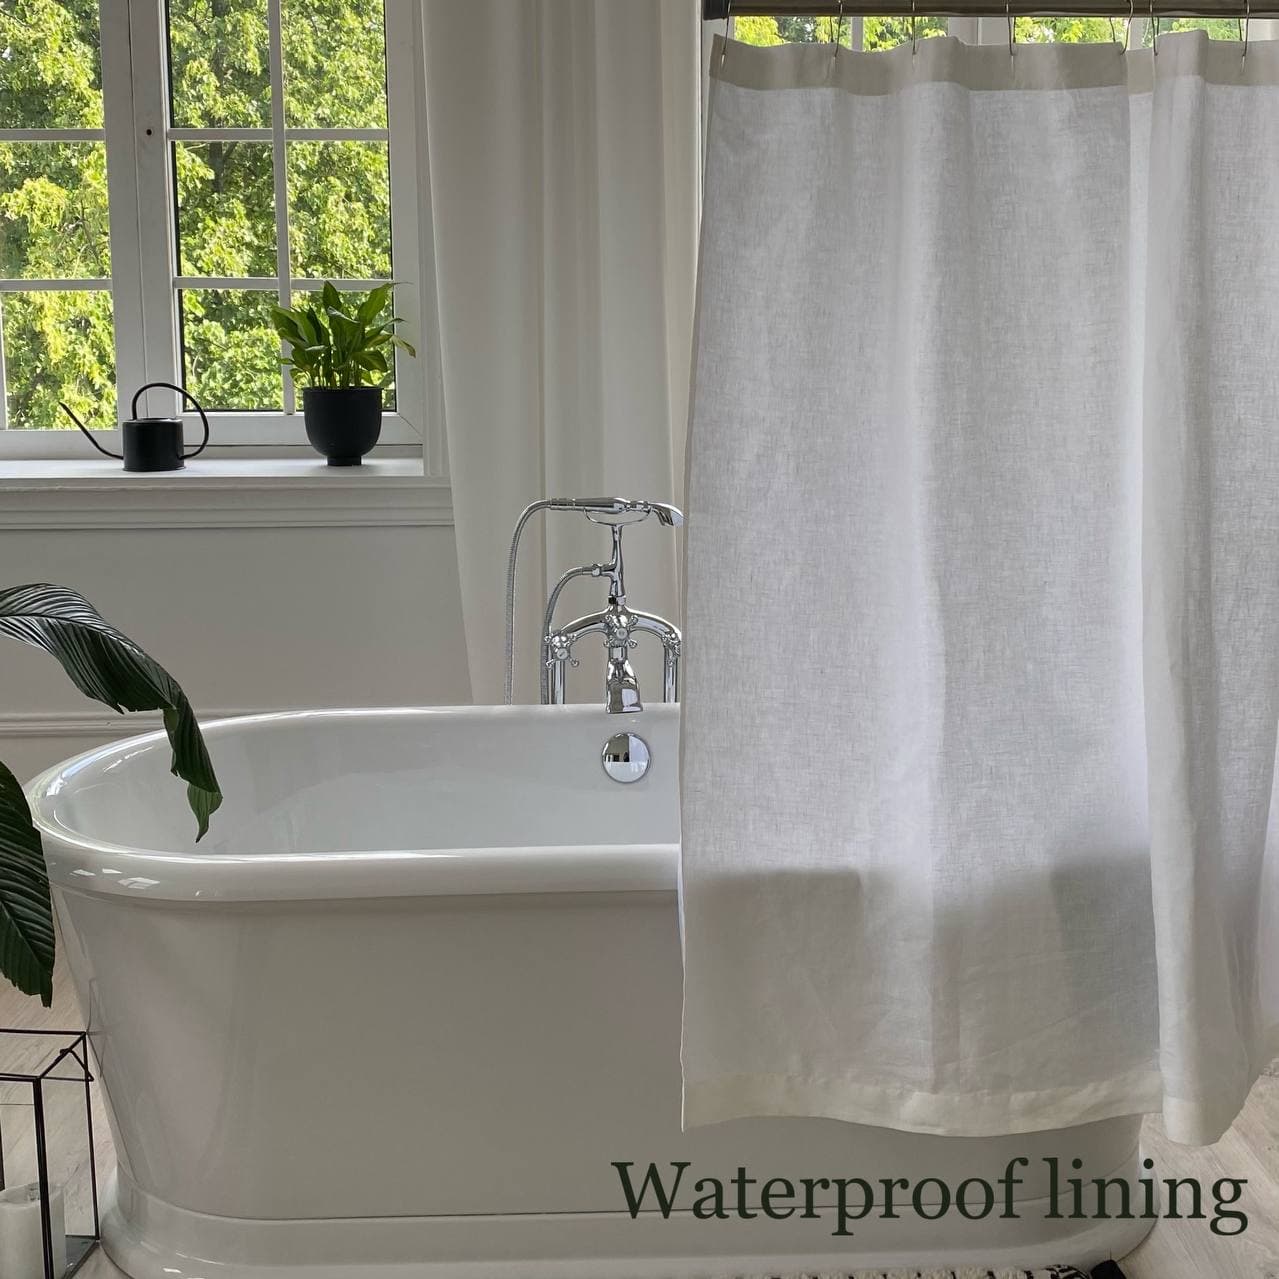 Shower Curtain with Wateproof Lining